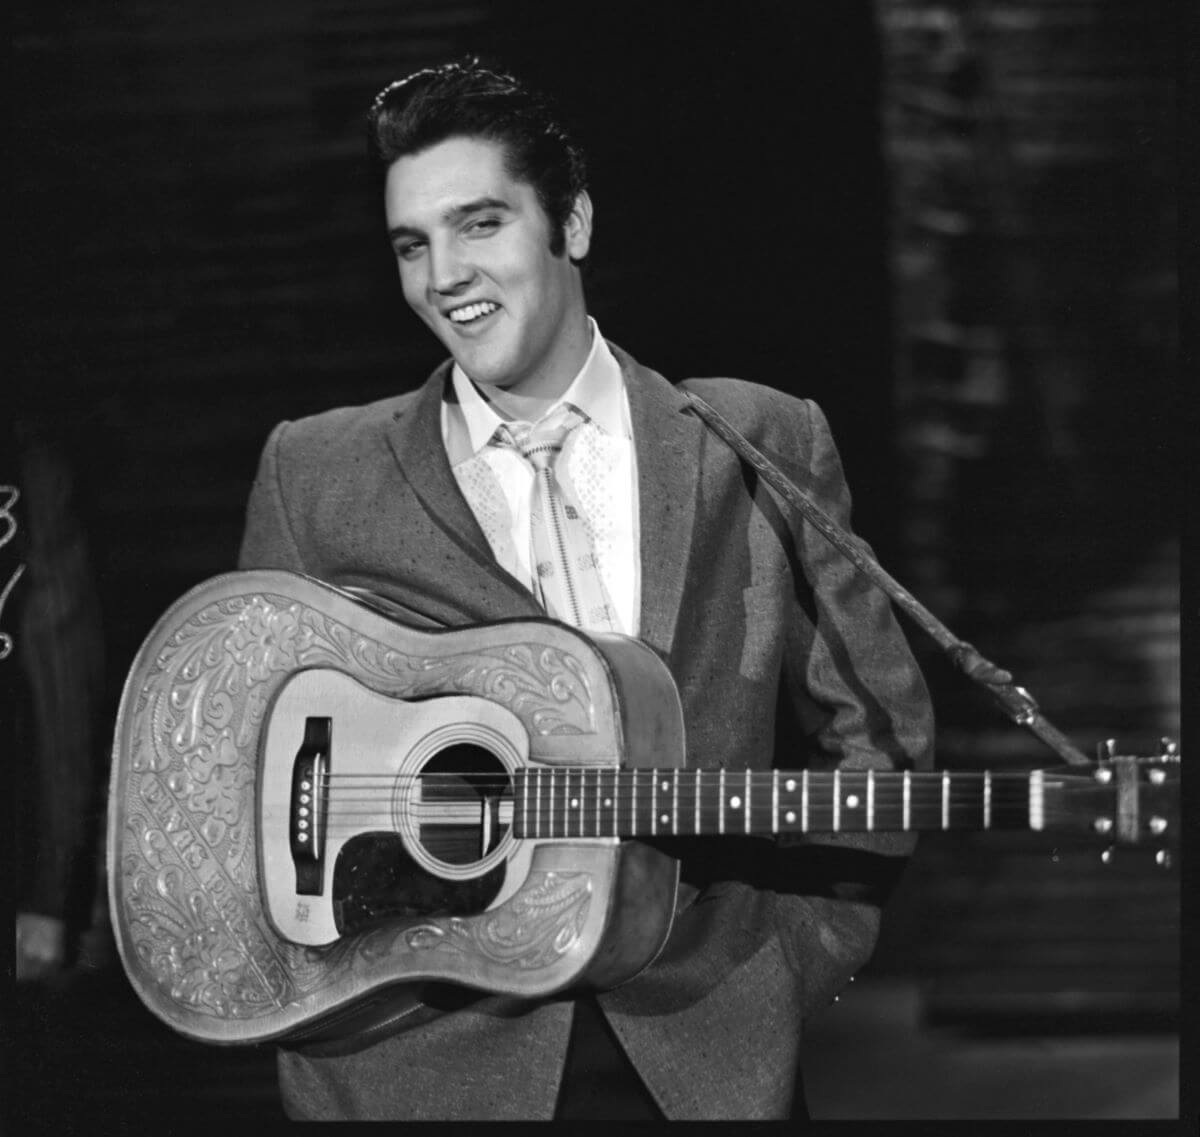 A black and white picture of Elvis wearing a suit and holding an acoustic guitar.